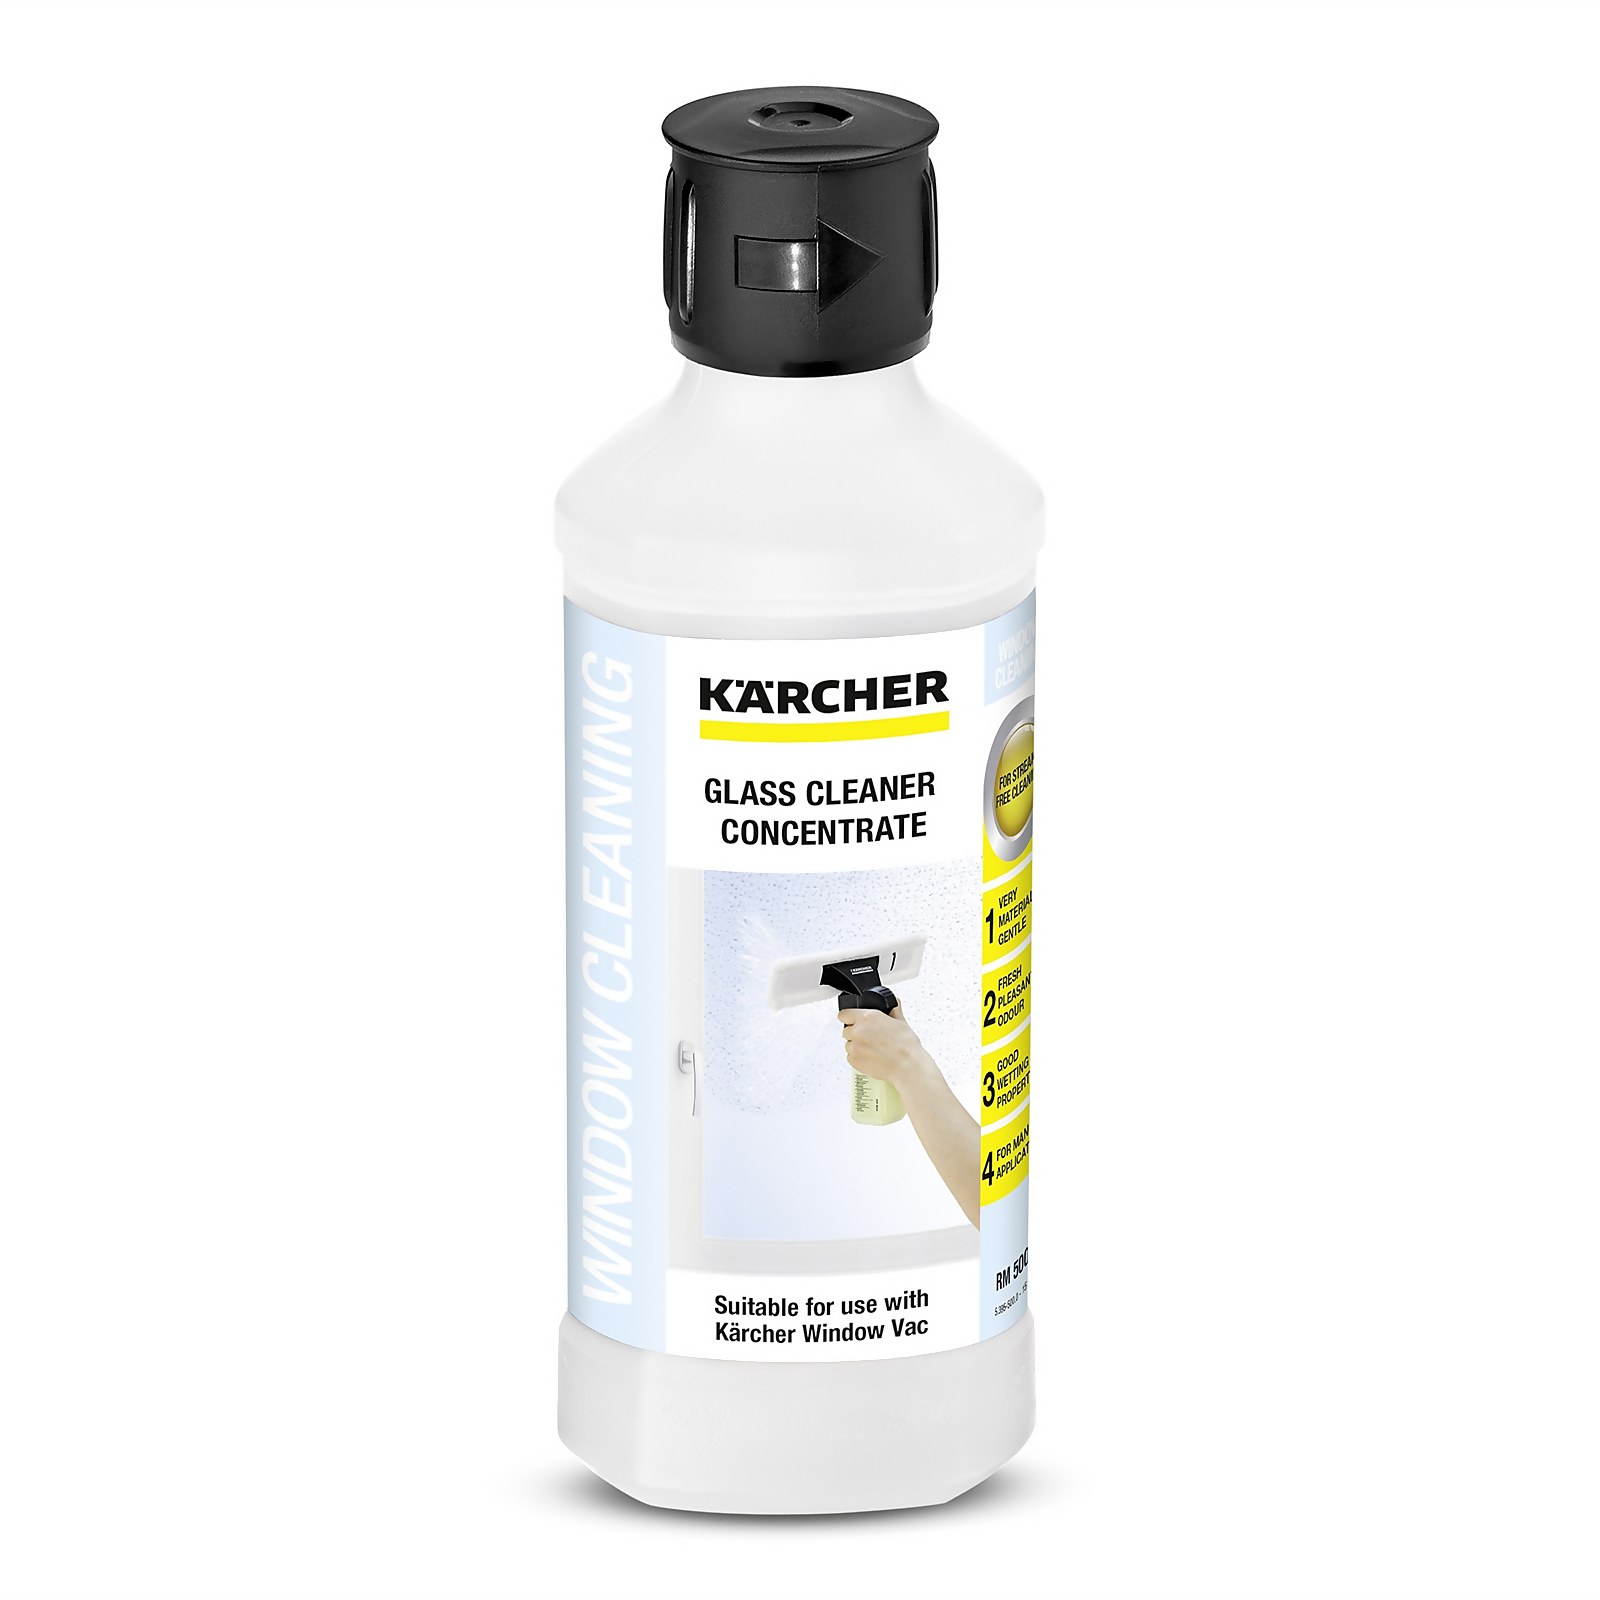 Kärcher Glass Cleaner Concentrate